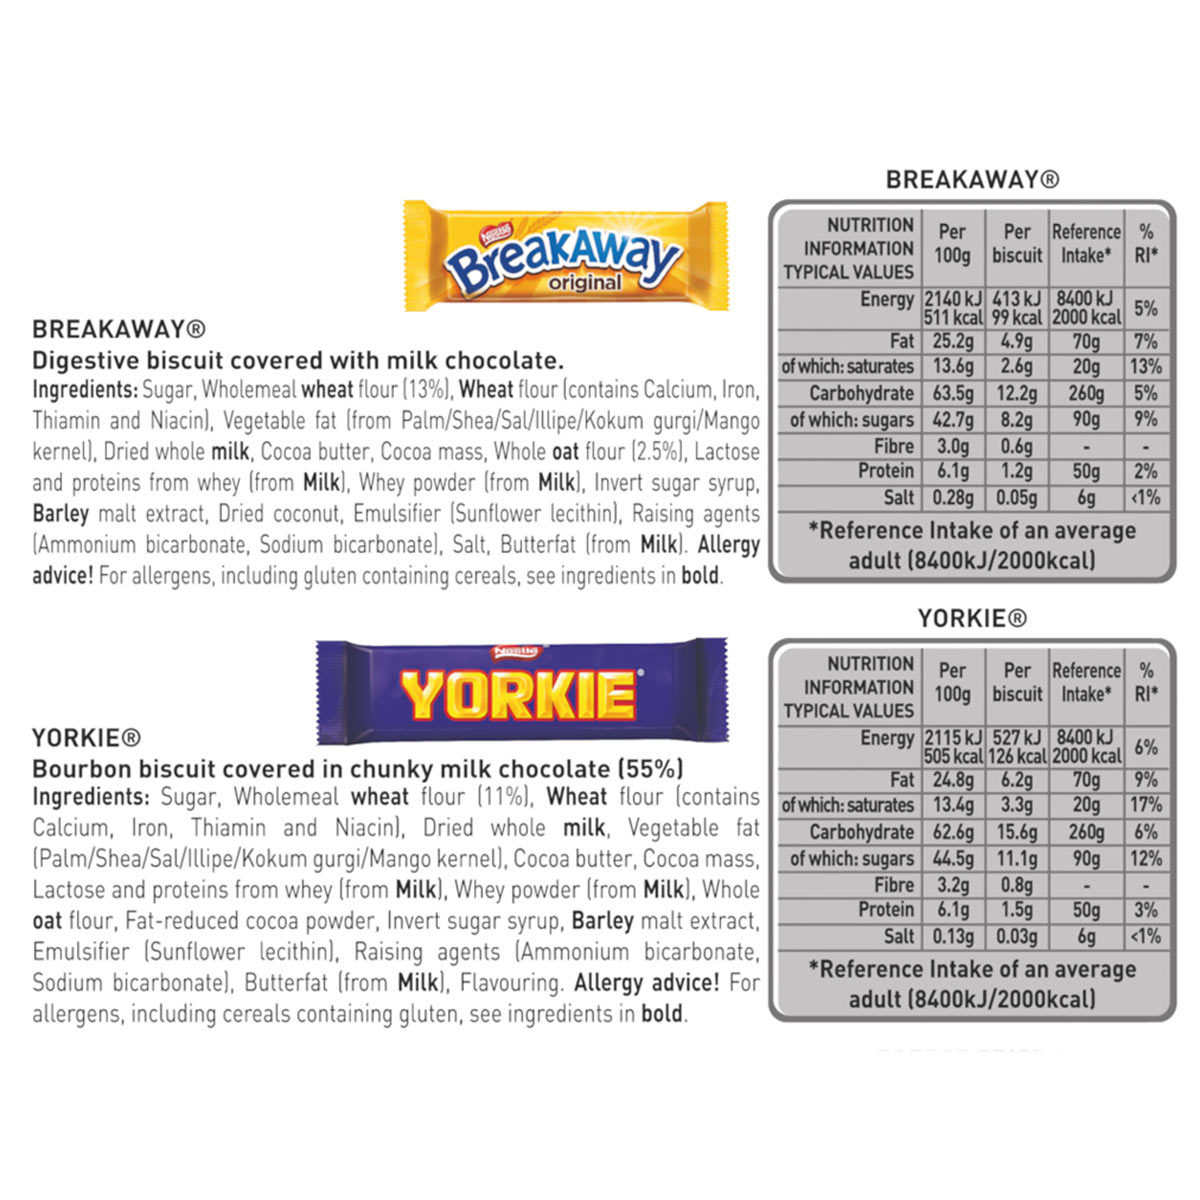 Image showing the ingrediants and nutritional information for the contents